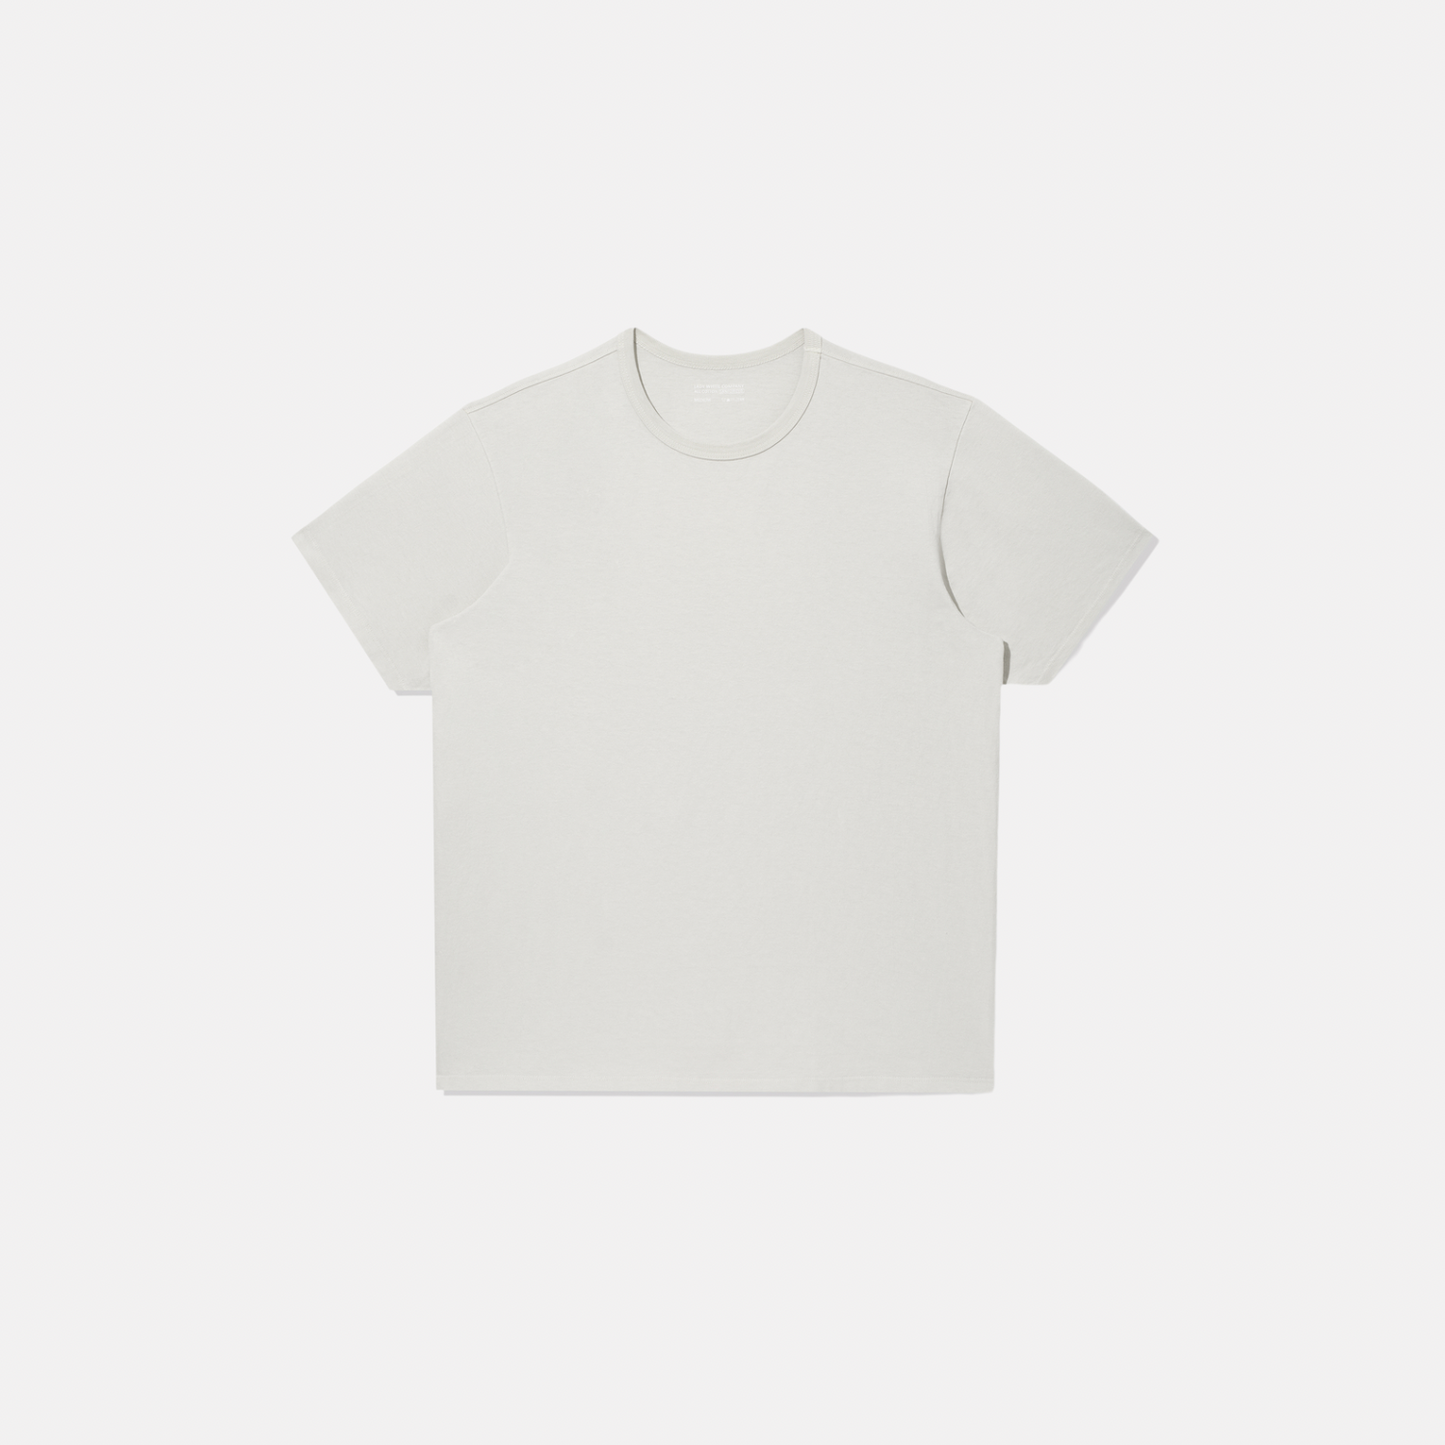 Lady White Co. Our T-Shirt - Putty LW101